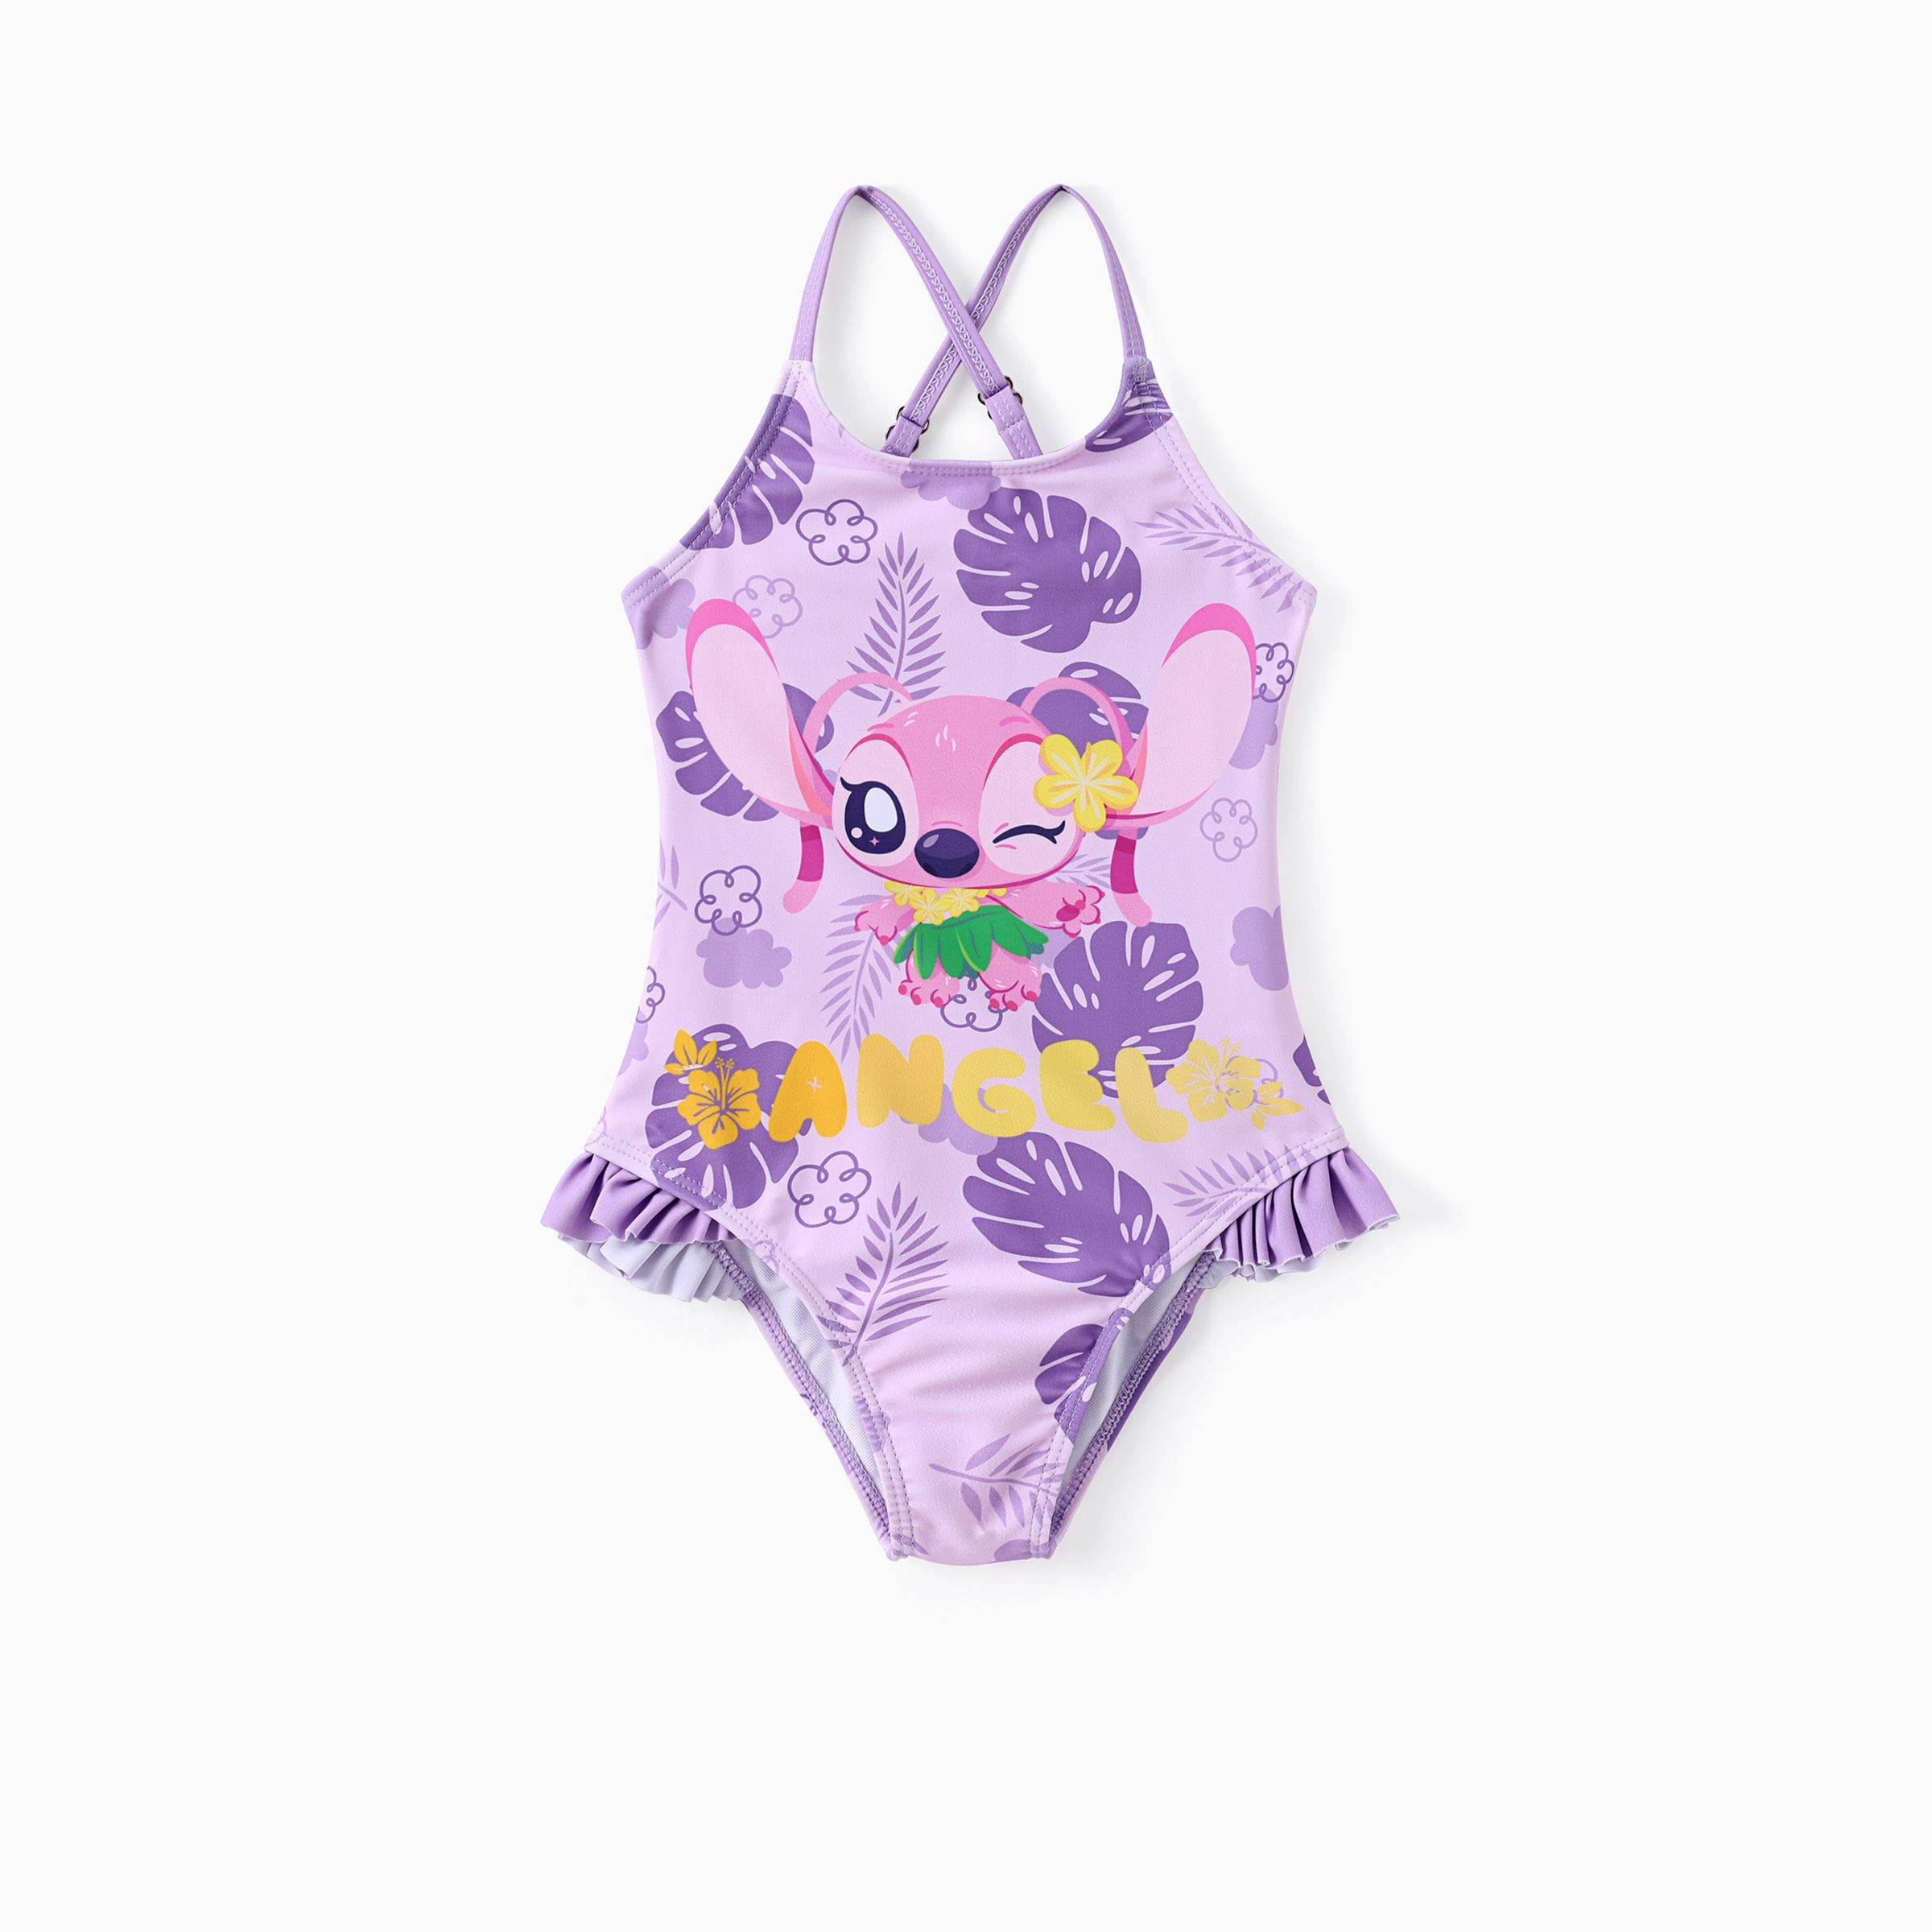 

Disney Stitch Baby/Toddler Girls 1pc Character Floral Plant Print Ruffle-hem Swimsuit